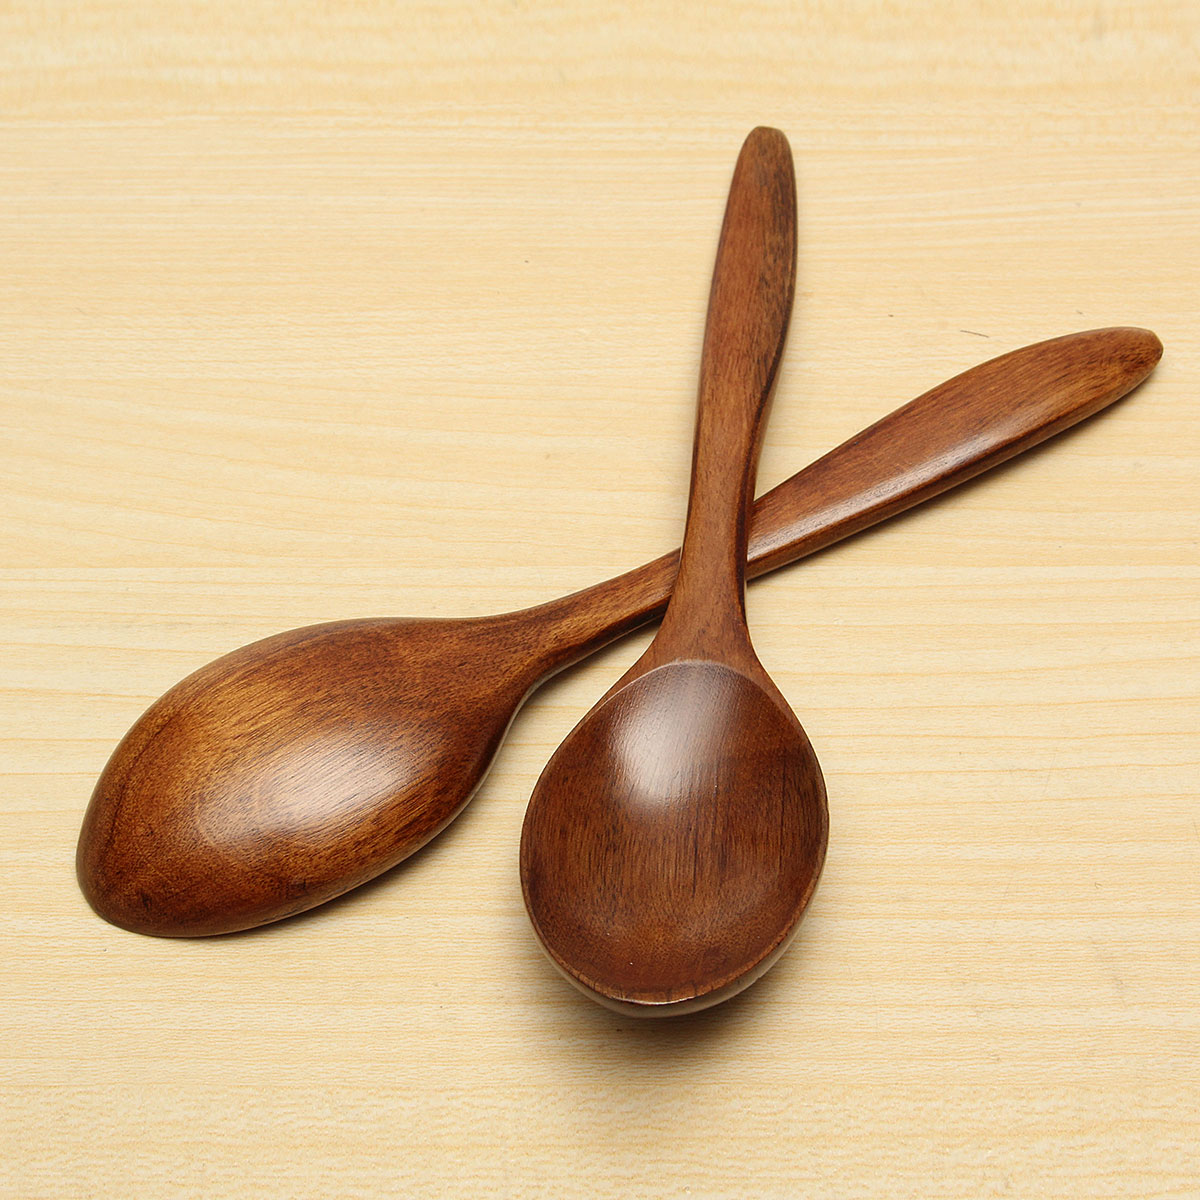 5Pcs-Wooden-Cooking-Kitchen-Utensil-Coffee-Tea-Ice-Cream-Soup-Caterin-Spoon-Tool-1067937-5